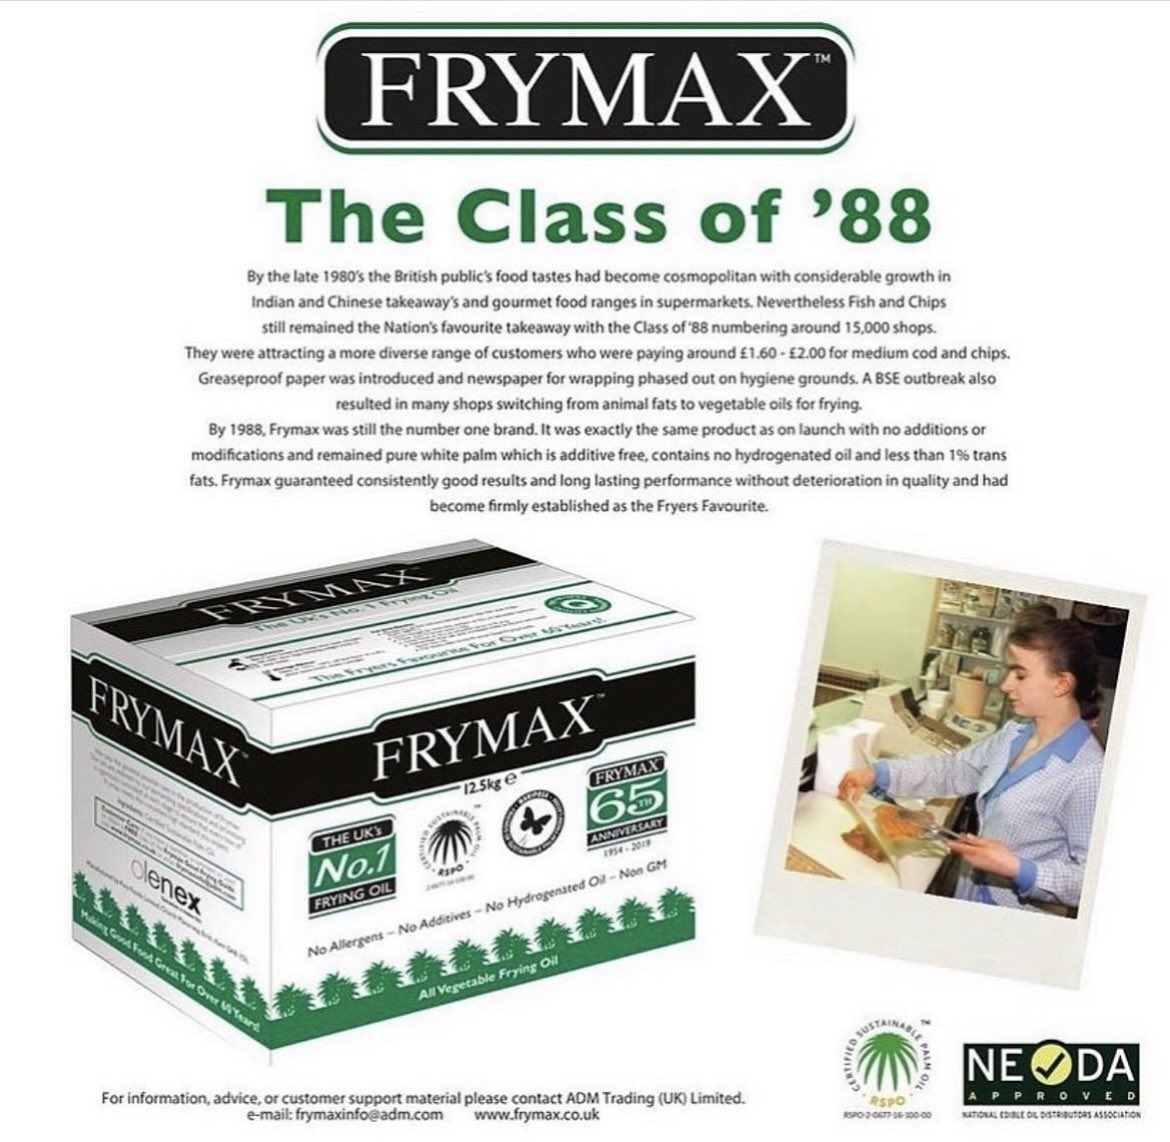 By the late 1980’s the British public’s food tastes had become cosmopolitan with considerable growth in Indian and Chinese takeaway’s and gourmet food ranges in supermarkets.

Read more about Frymax and the history >> library.myebook.com/FryMag/fry-mar…

#oil #history #trust #frymax #fry